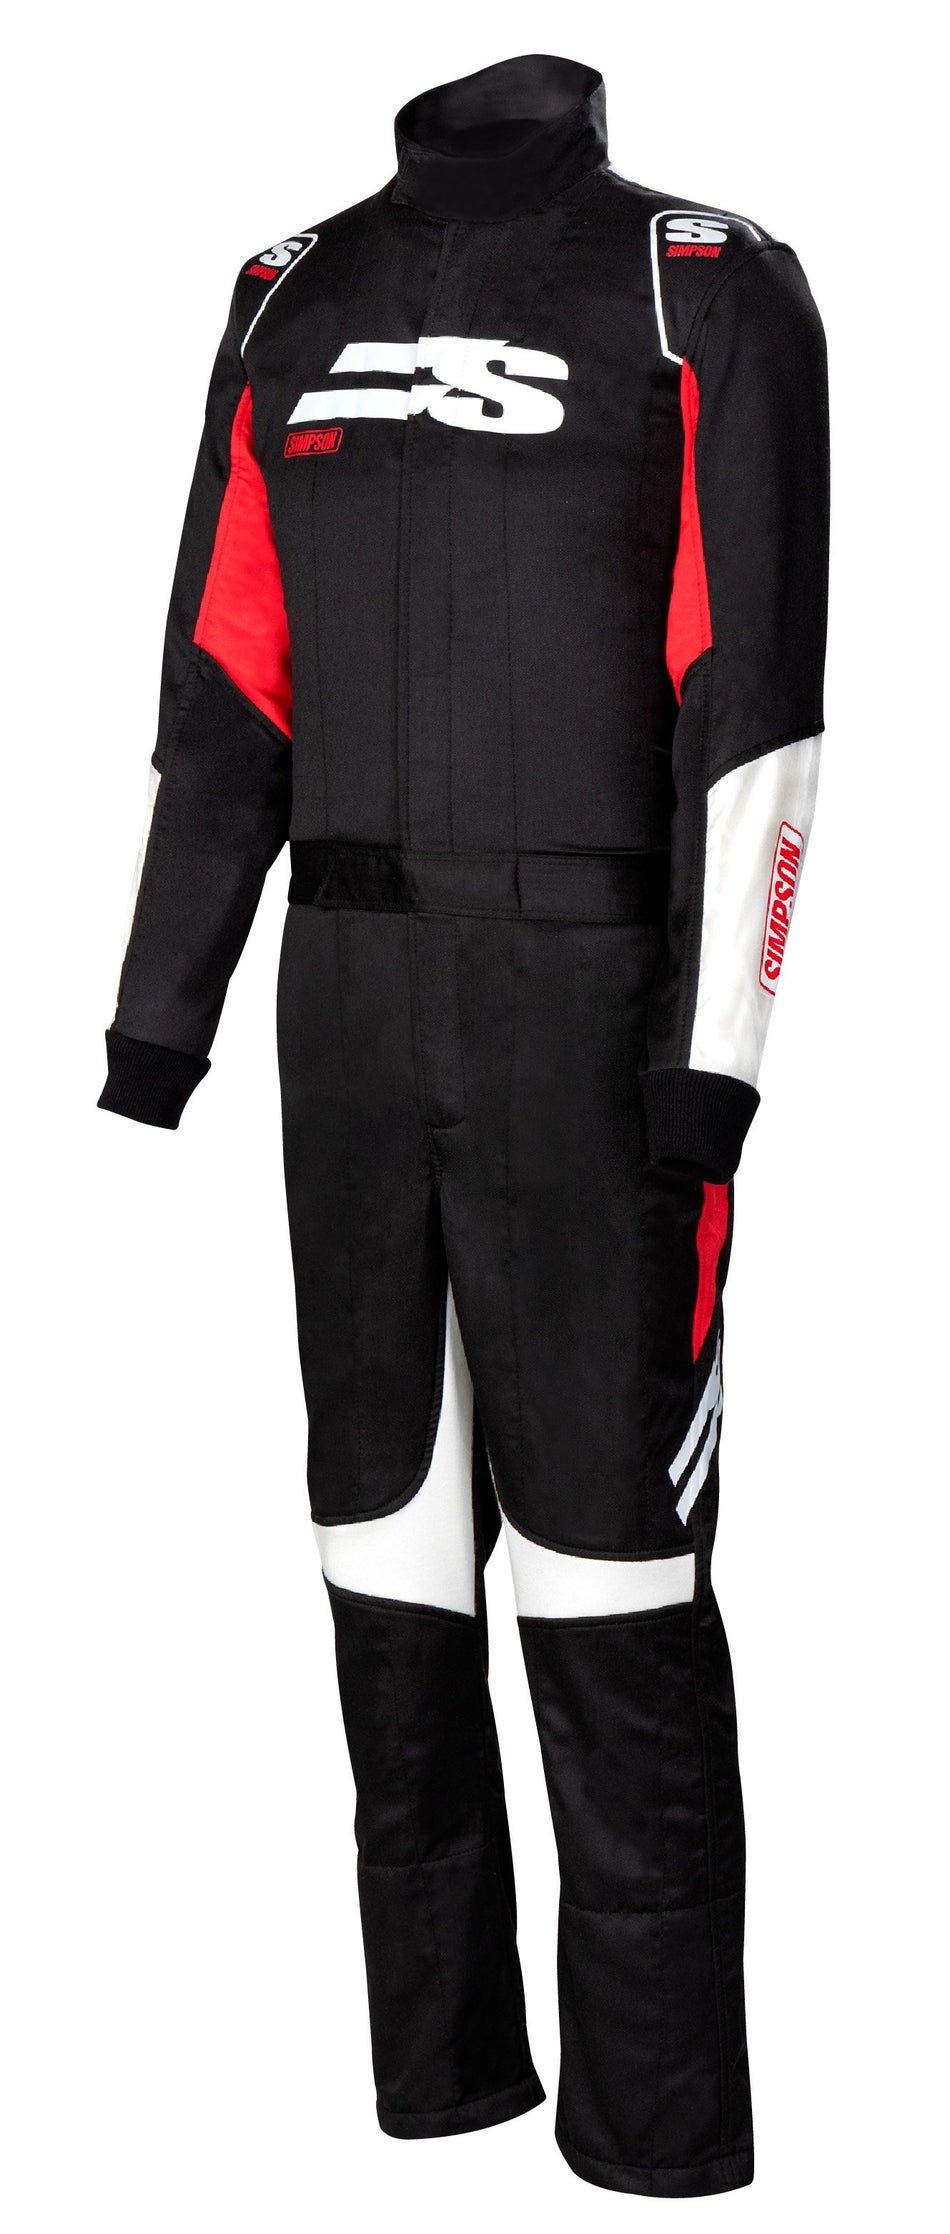 Simpson Airspeed Suit - Black/Red/White